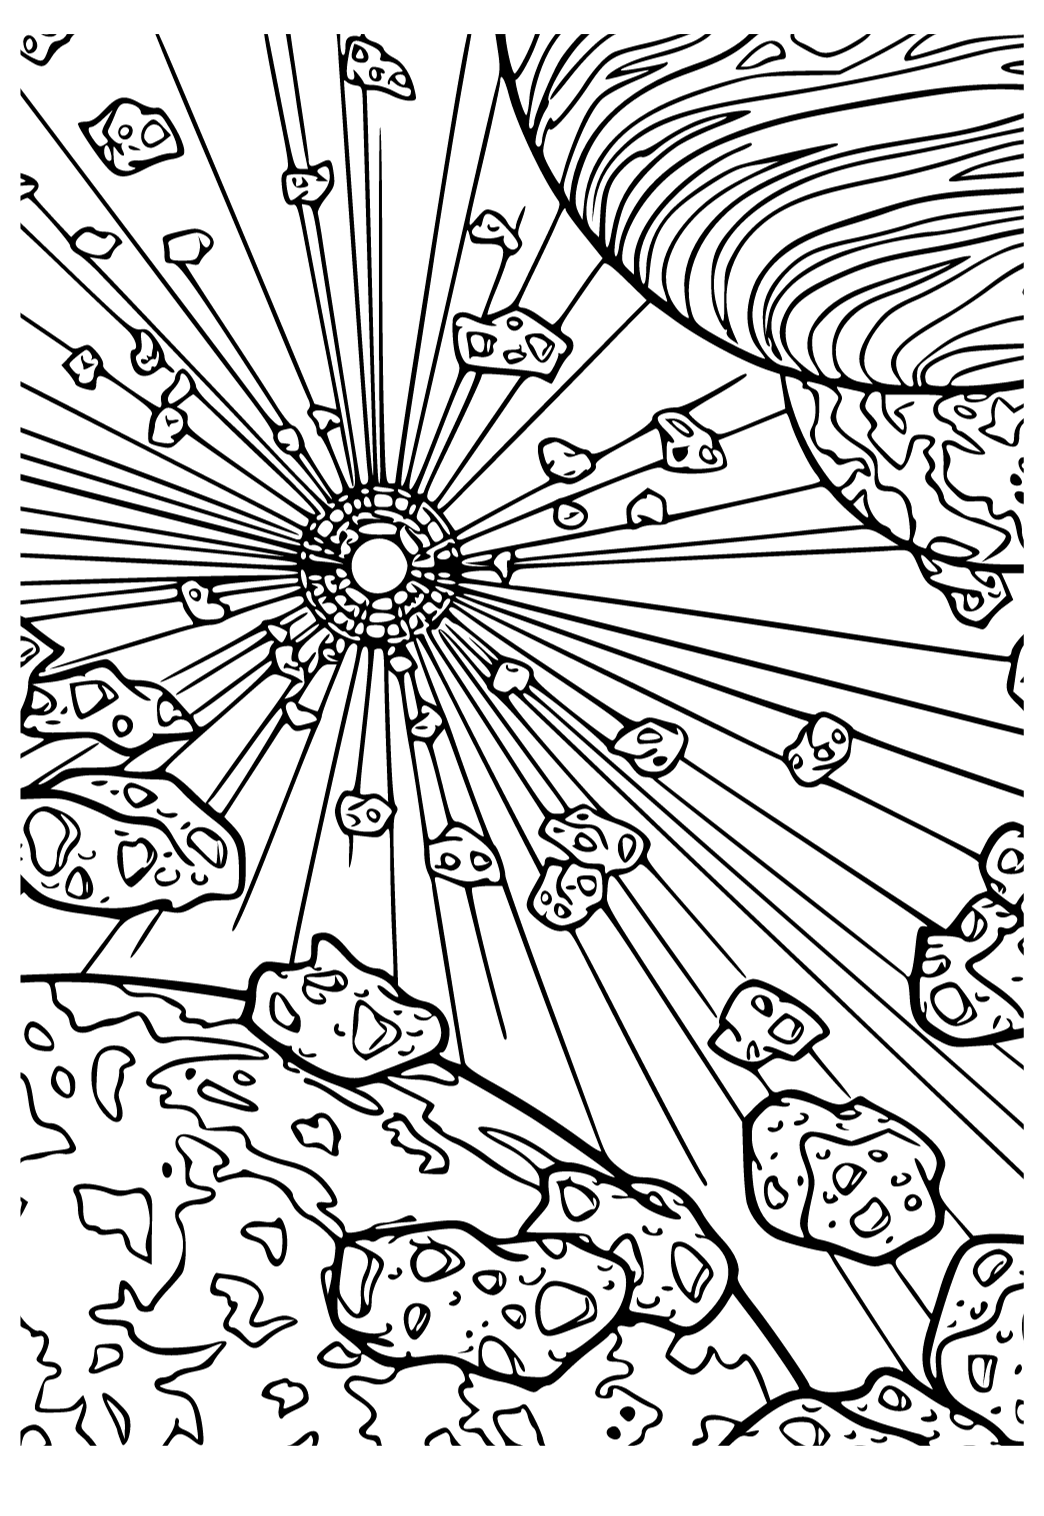 Free printable galaxy asteroids coloring page for adults and kids